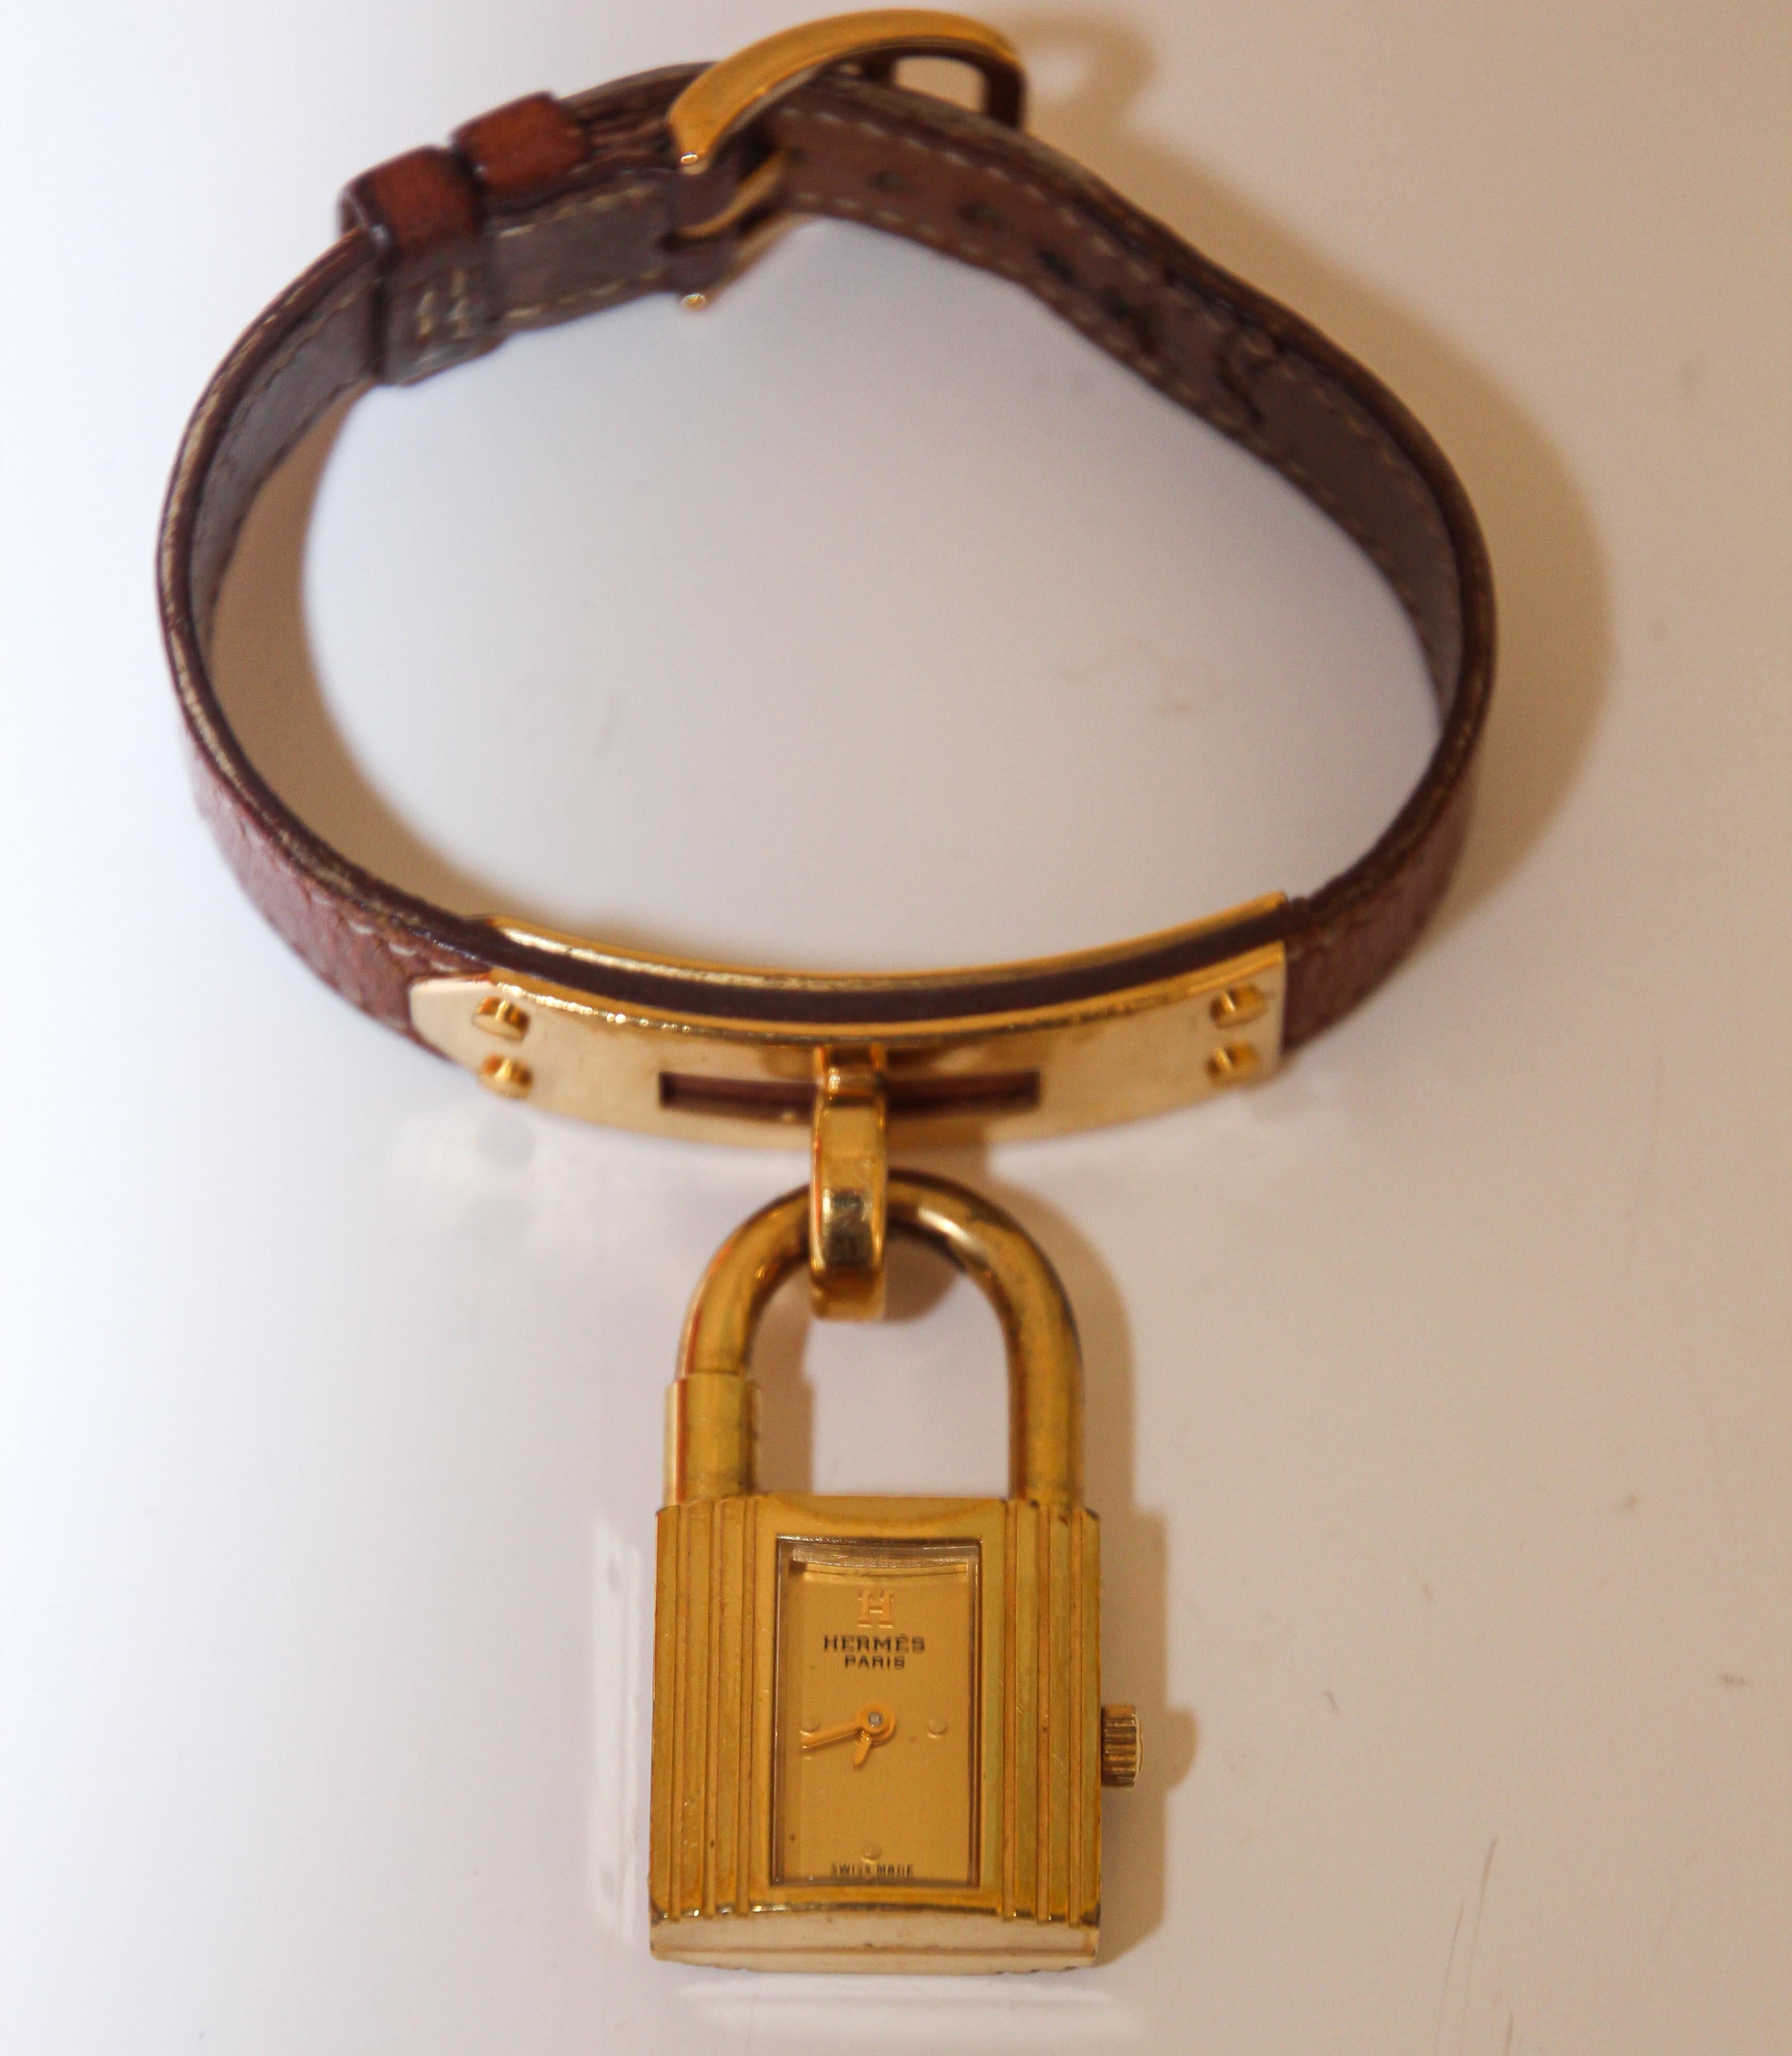 Vintage Hermes Kelly Watch.
1989 Hermes tan leather Kelly Watch gold plated.
Removable gold plated lock charm watch which dangles from a gold-plated base on the strap.
Hermes Kelly watch, stamped circle T from 1980. 
Swiss made, signed push/pull